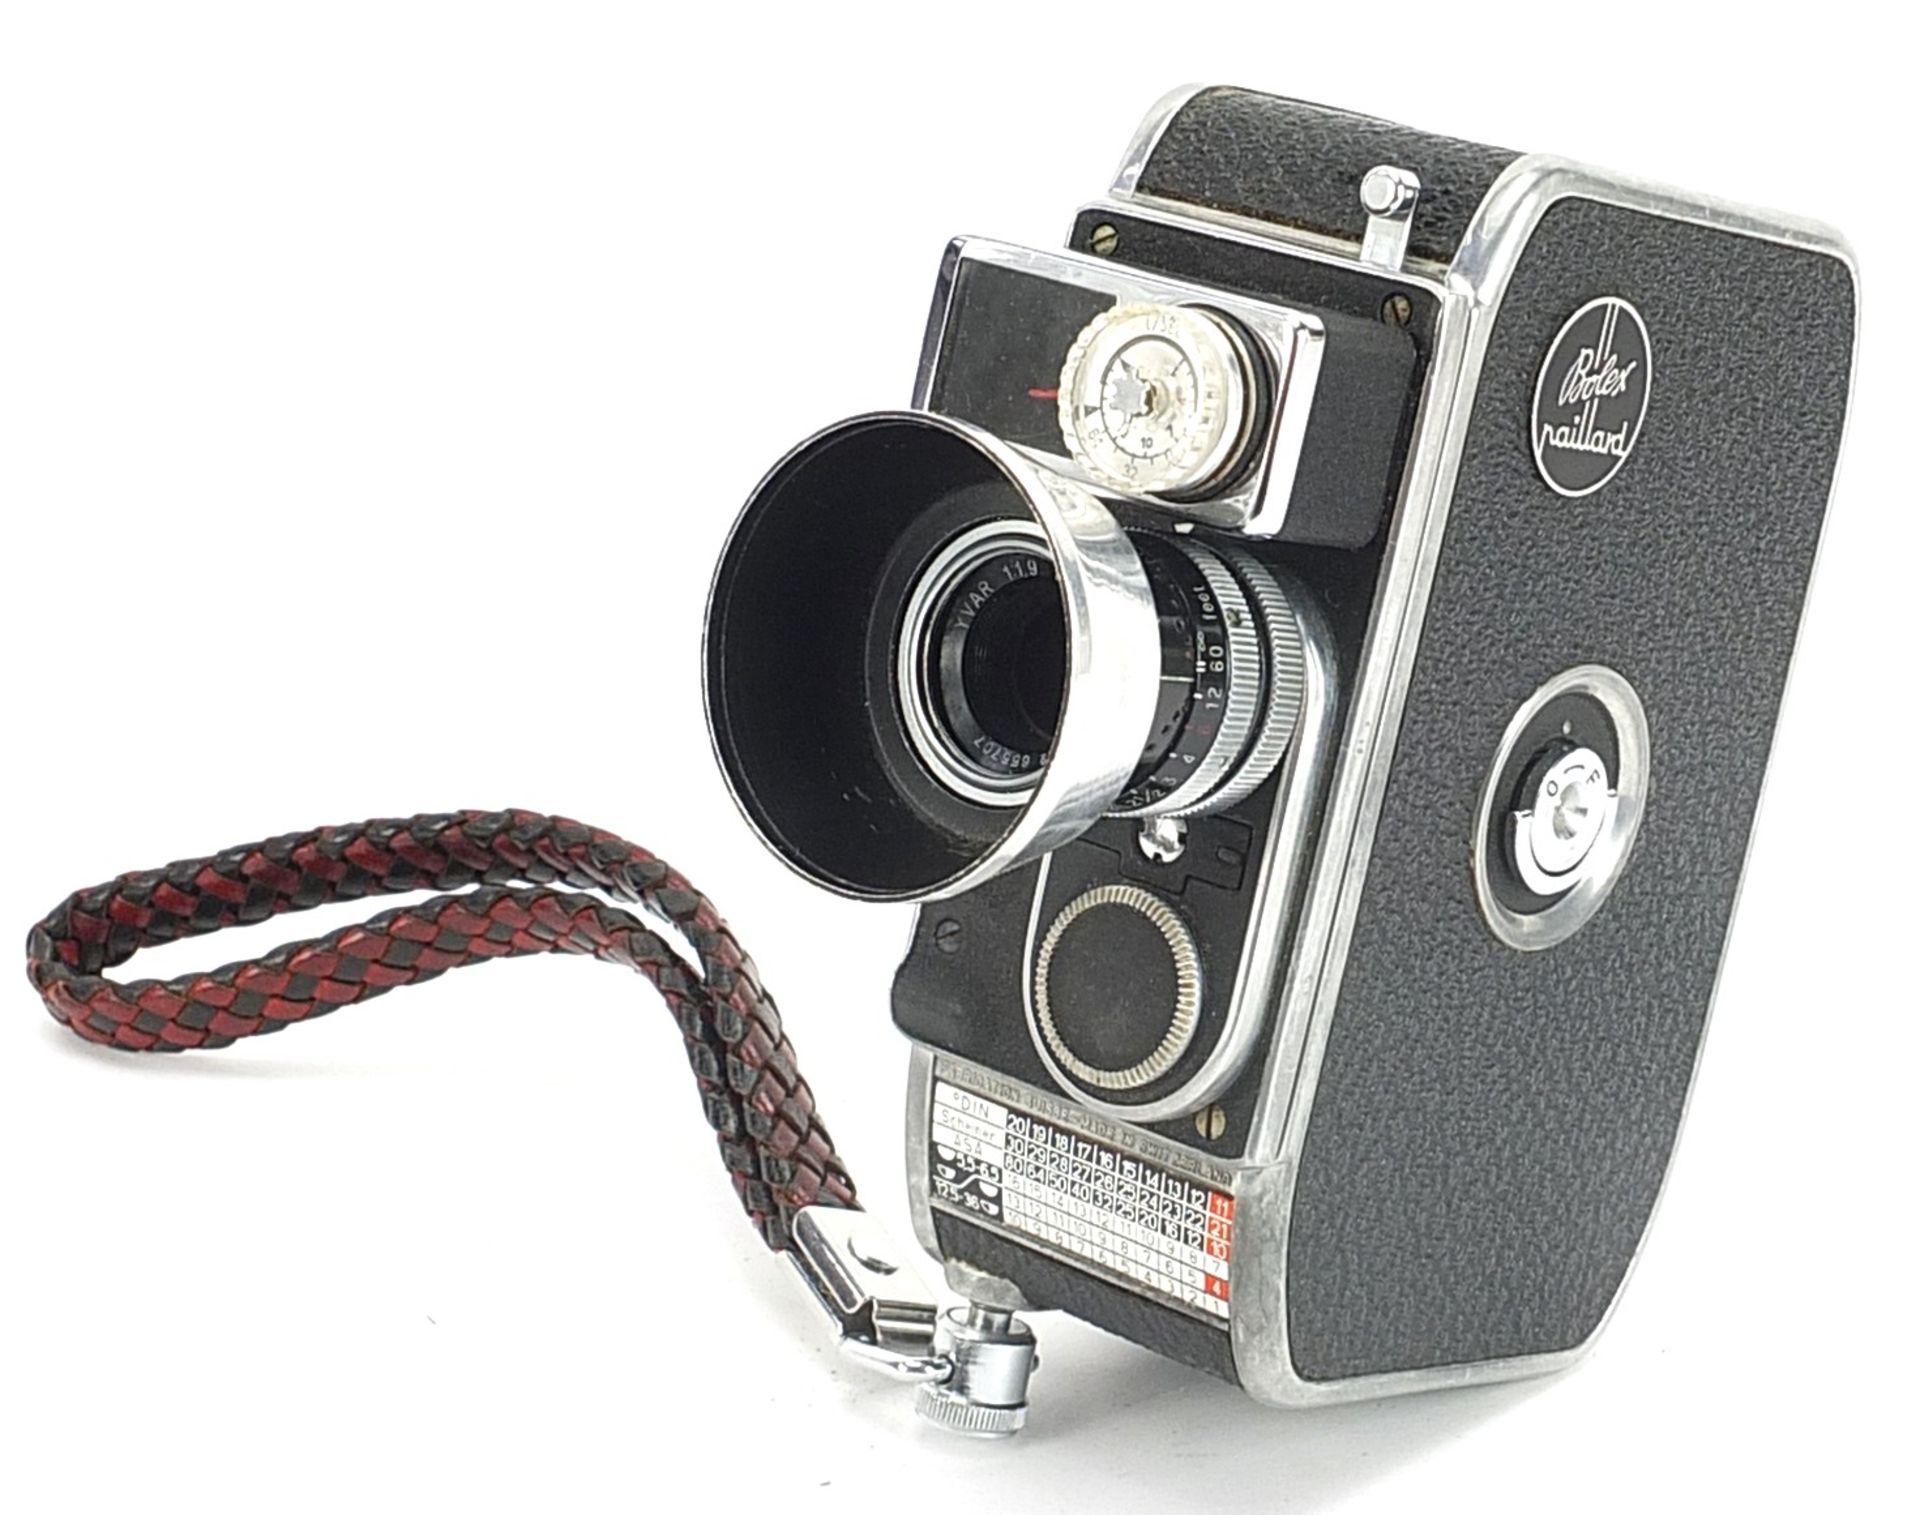 Bolex Paillard B8L camera with handle, case and instuctions, the case 20cm wide - Image 4 of 6